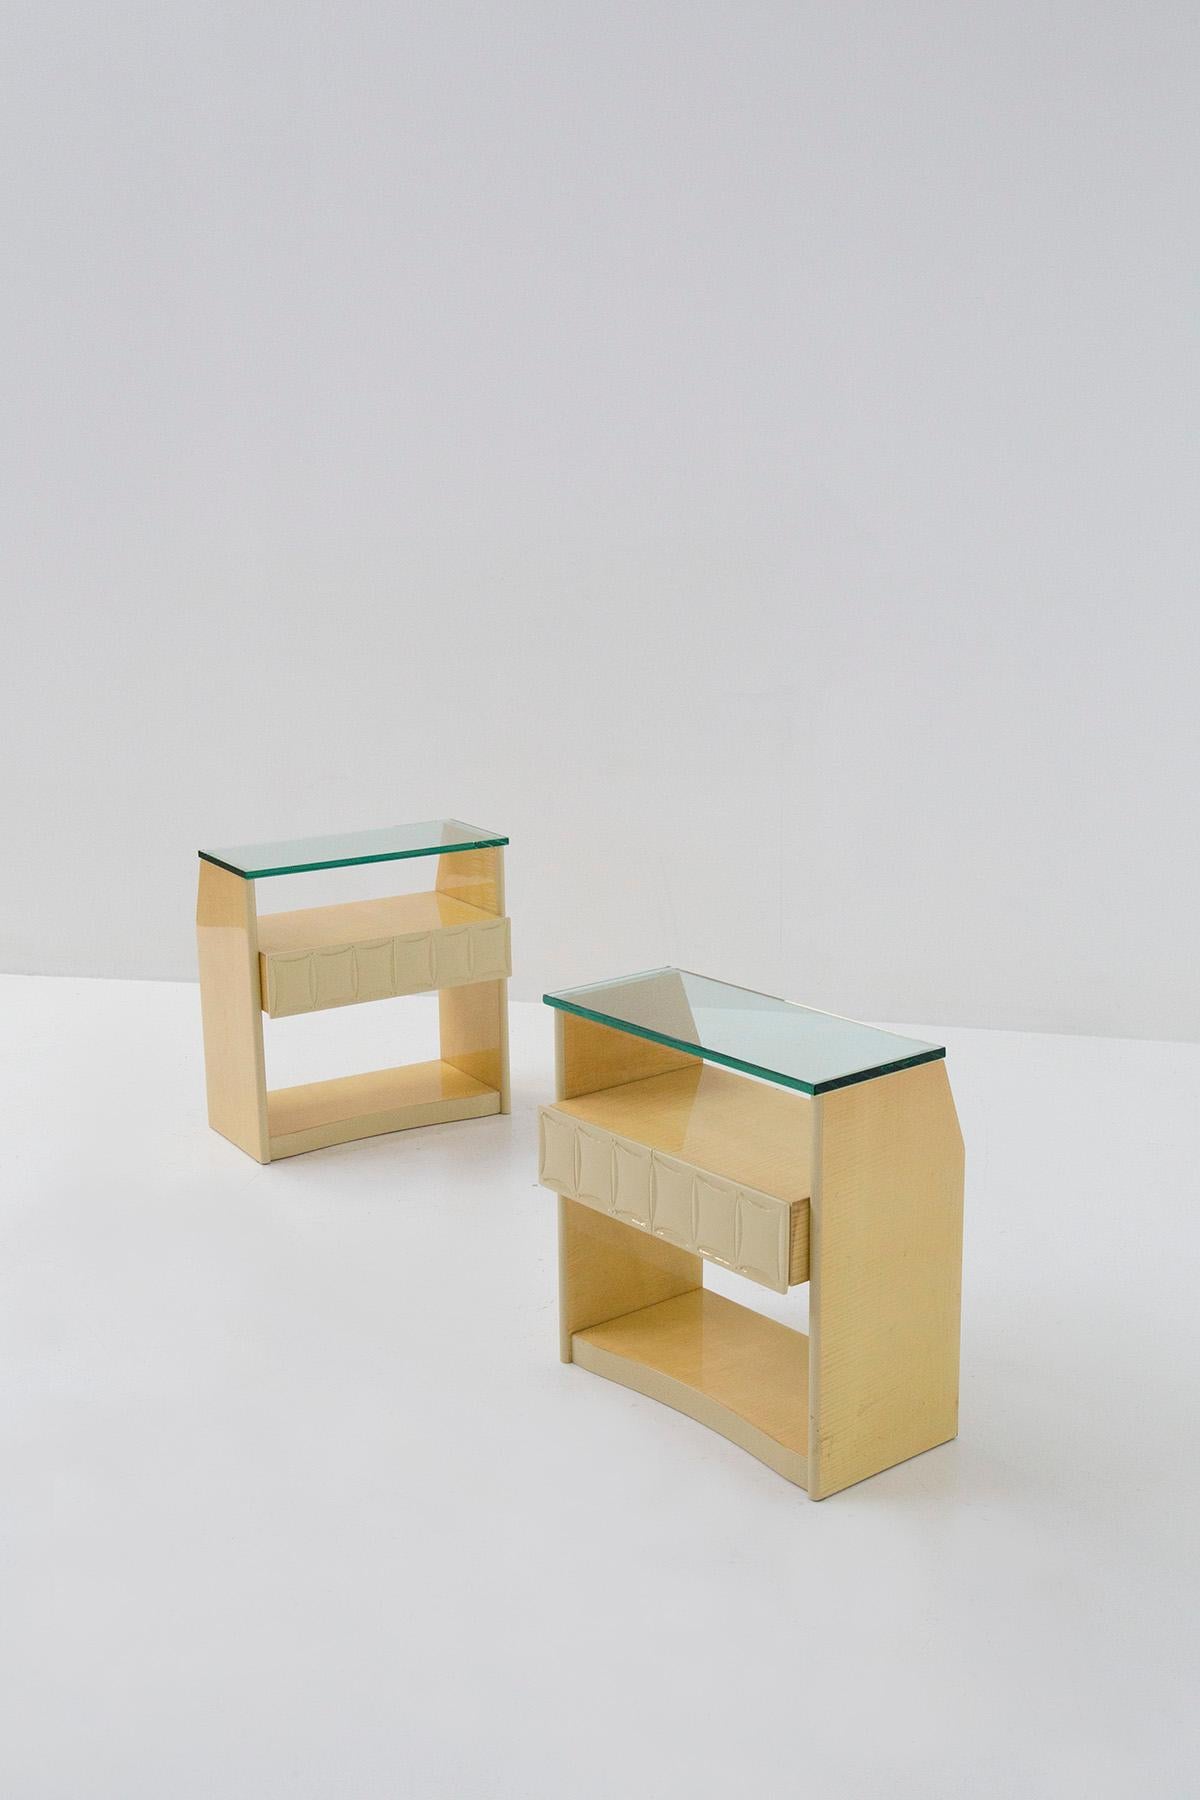 Elegant and refined bedside tables by Giovanni Gariboldi from the 1950s, Italian. The pair of bedside tables was finely crafted in fine Italian workmanship. The bedside tables are made with a beige lacquered wooden frame with elegant grain. We